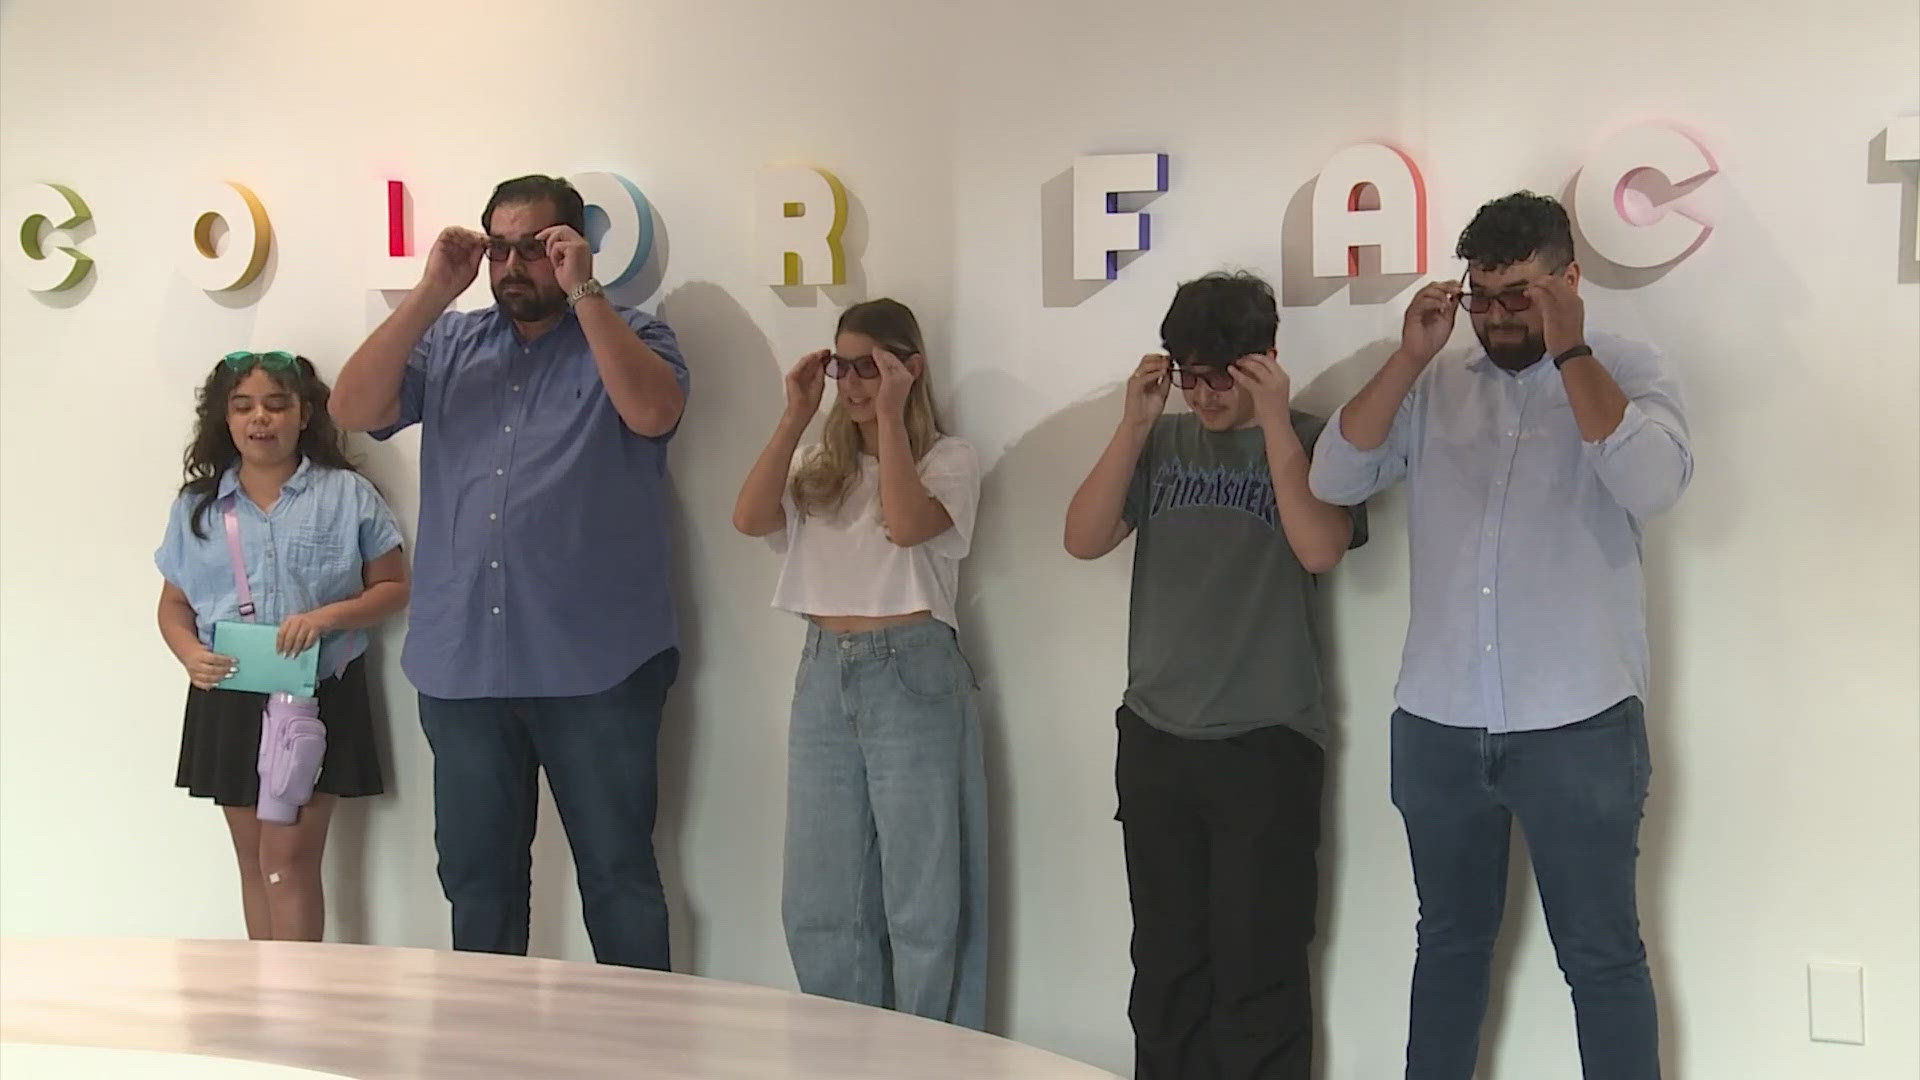 The Color Factory is offering special corrective glasses to visitors who are colorblind.